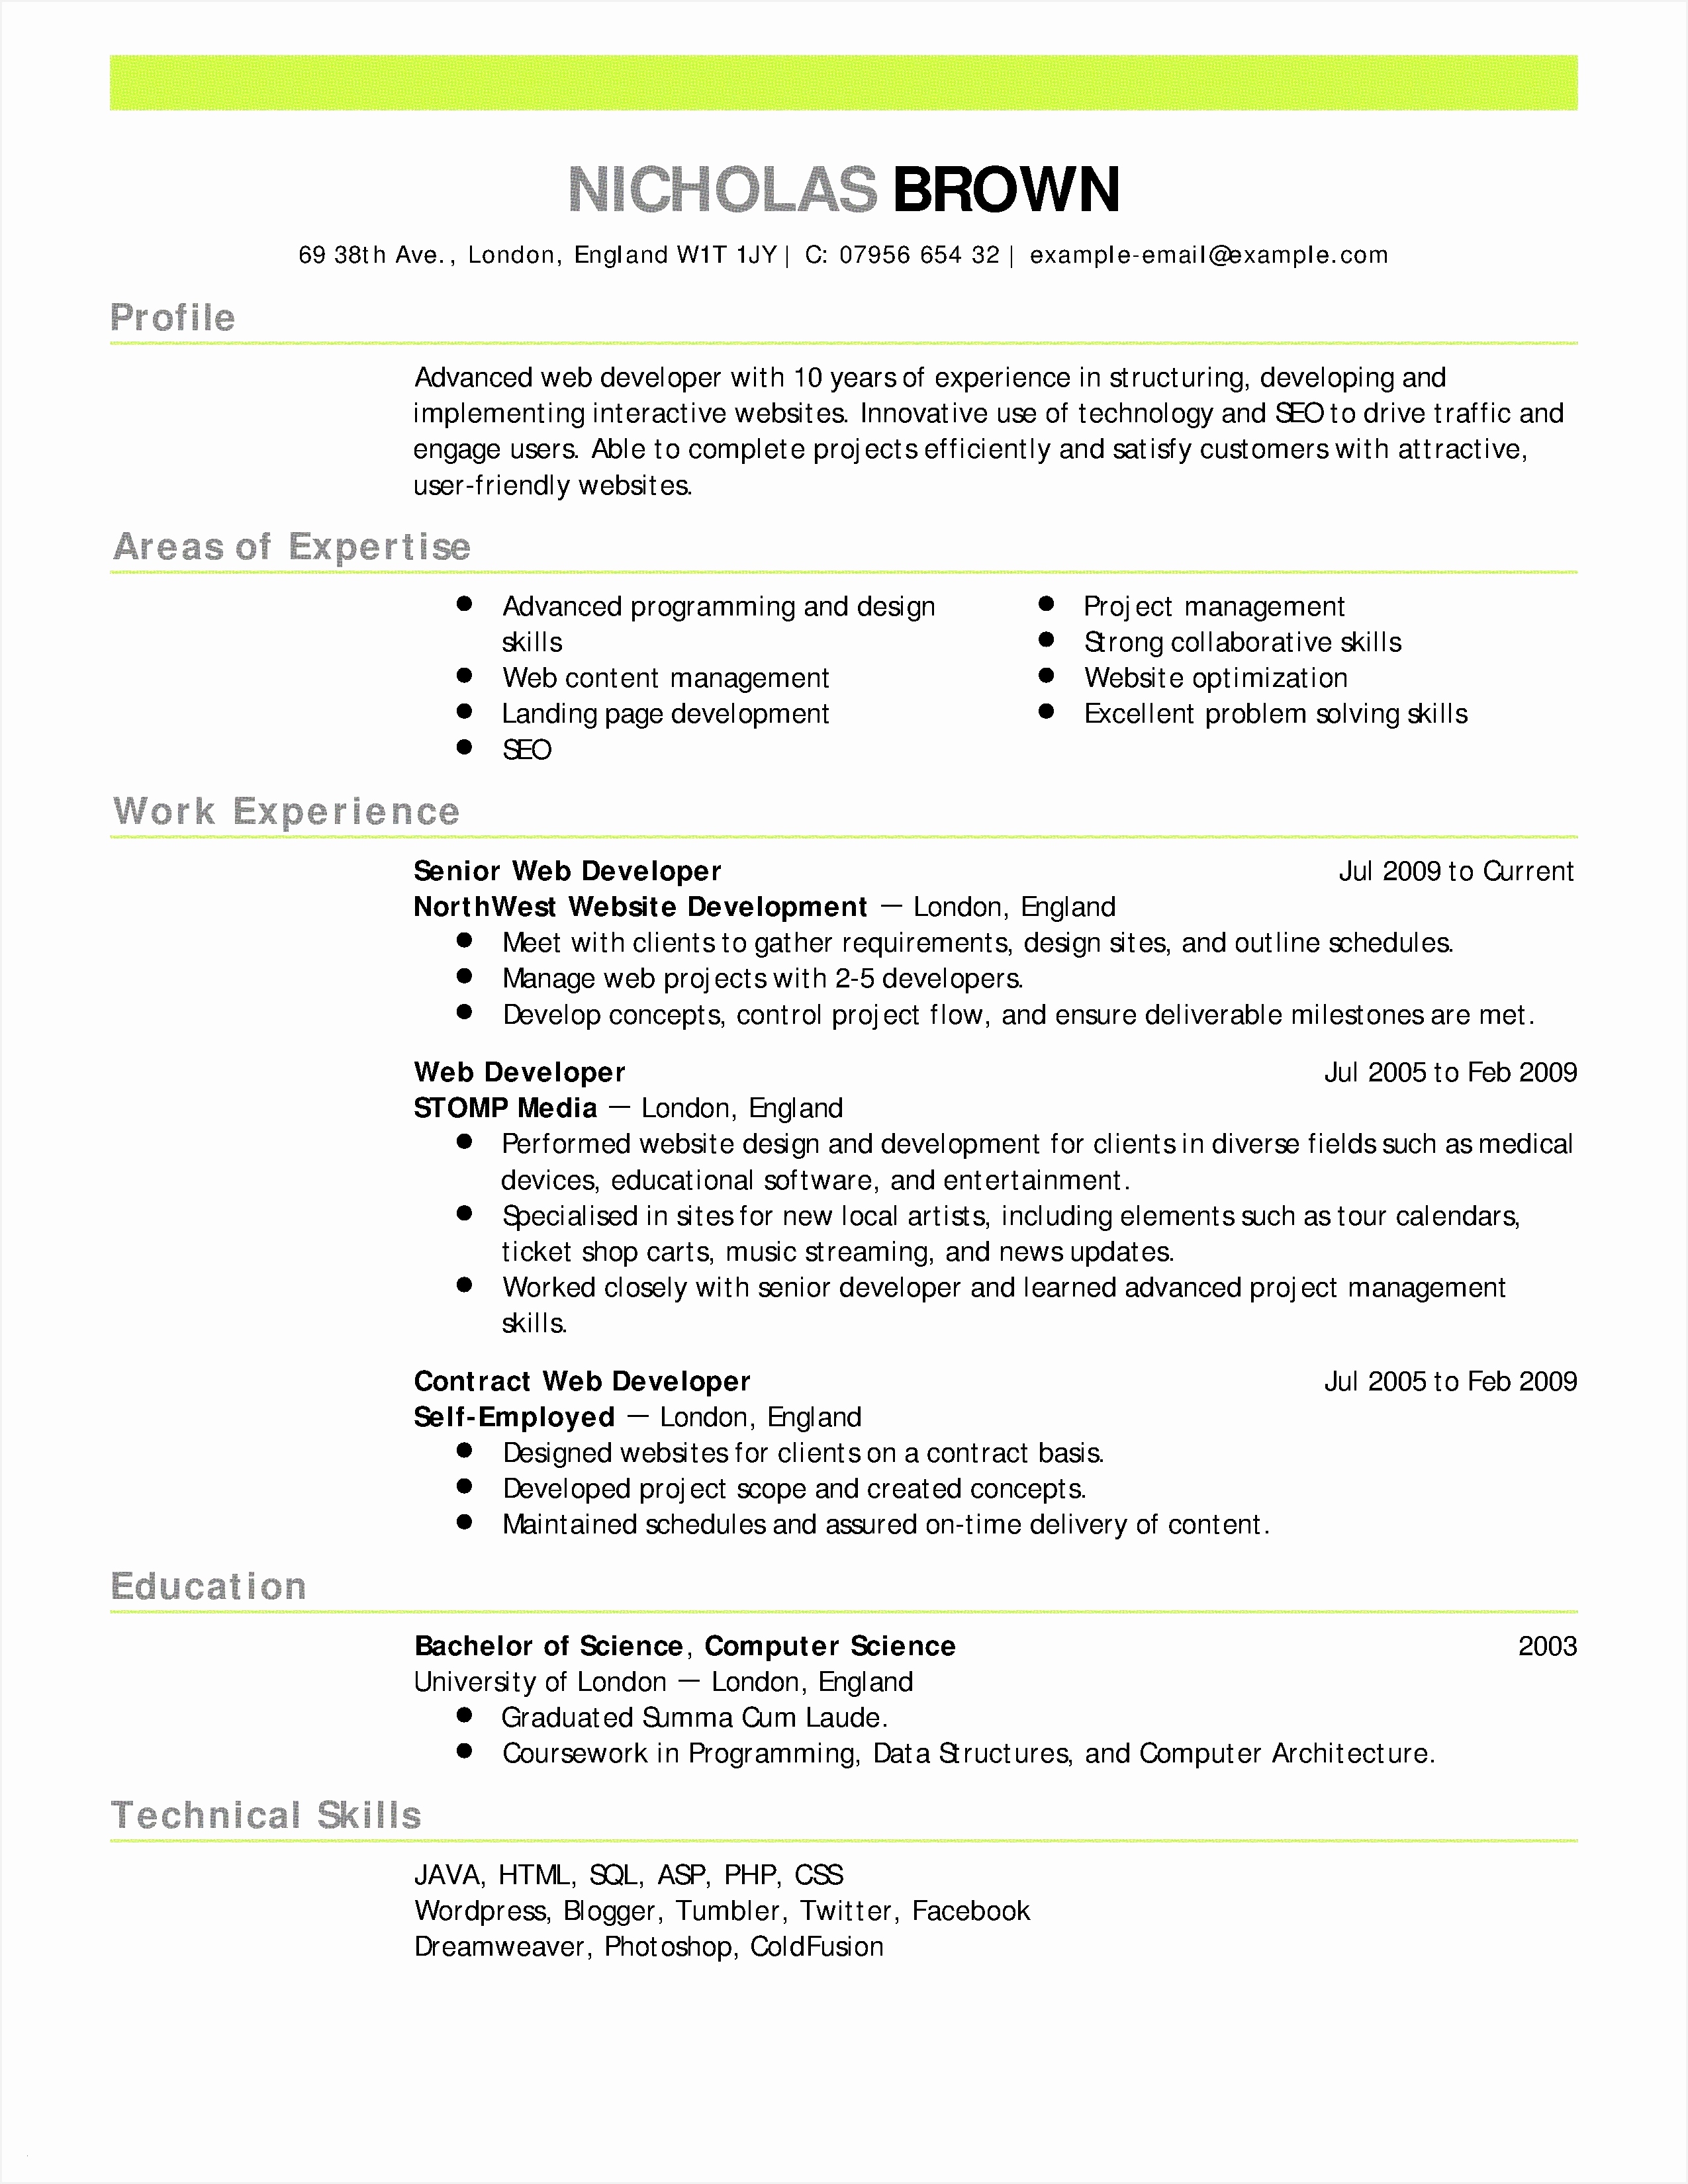 Accounting Resume Samples Awesome Bookkeeper Job Description for Resume Fresh Bookkeeping Resume Accounting Resume Samples33002550